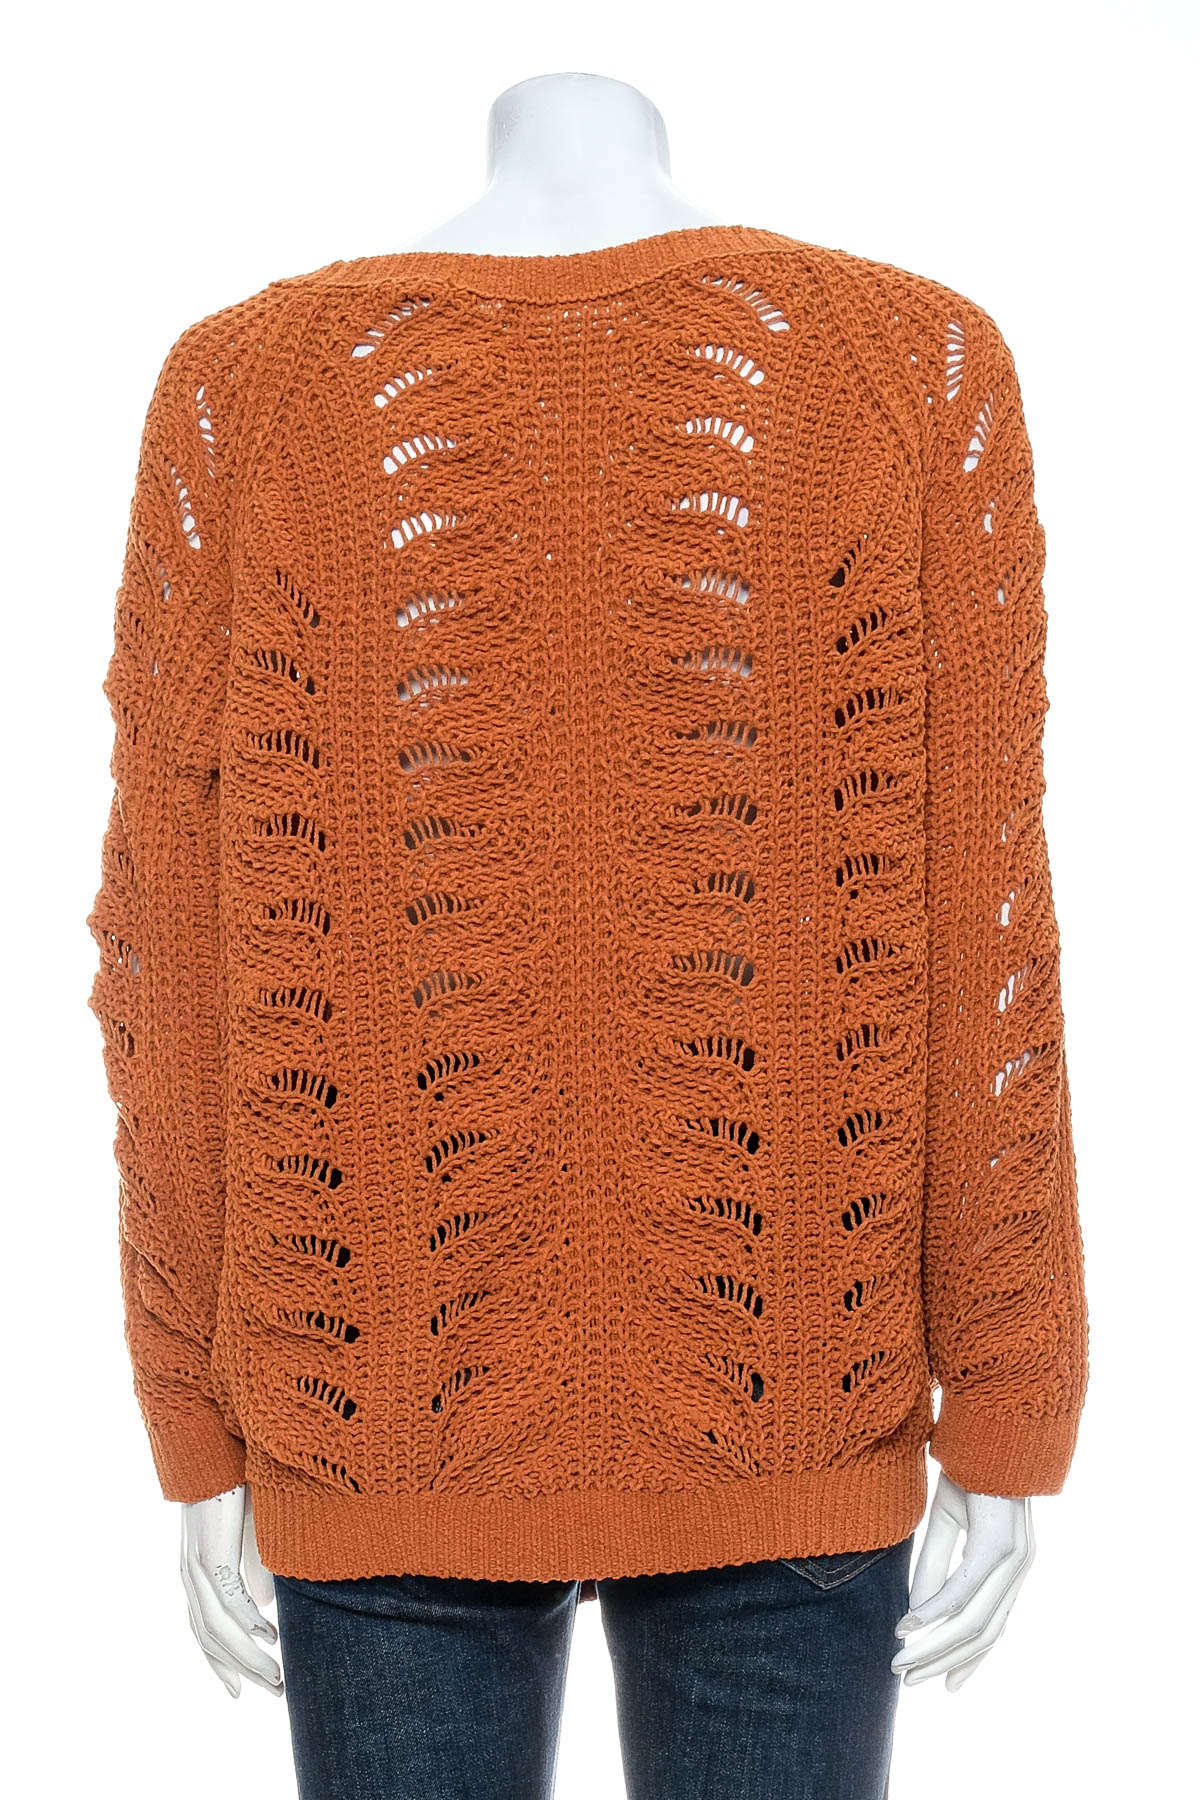 Women's sweater - ONLY CARMAKOMA - 1